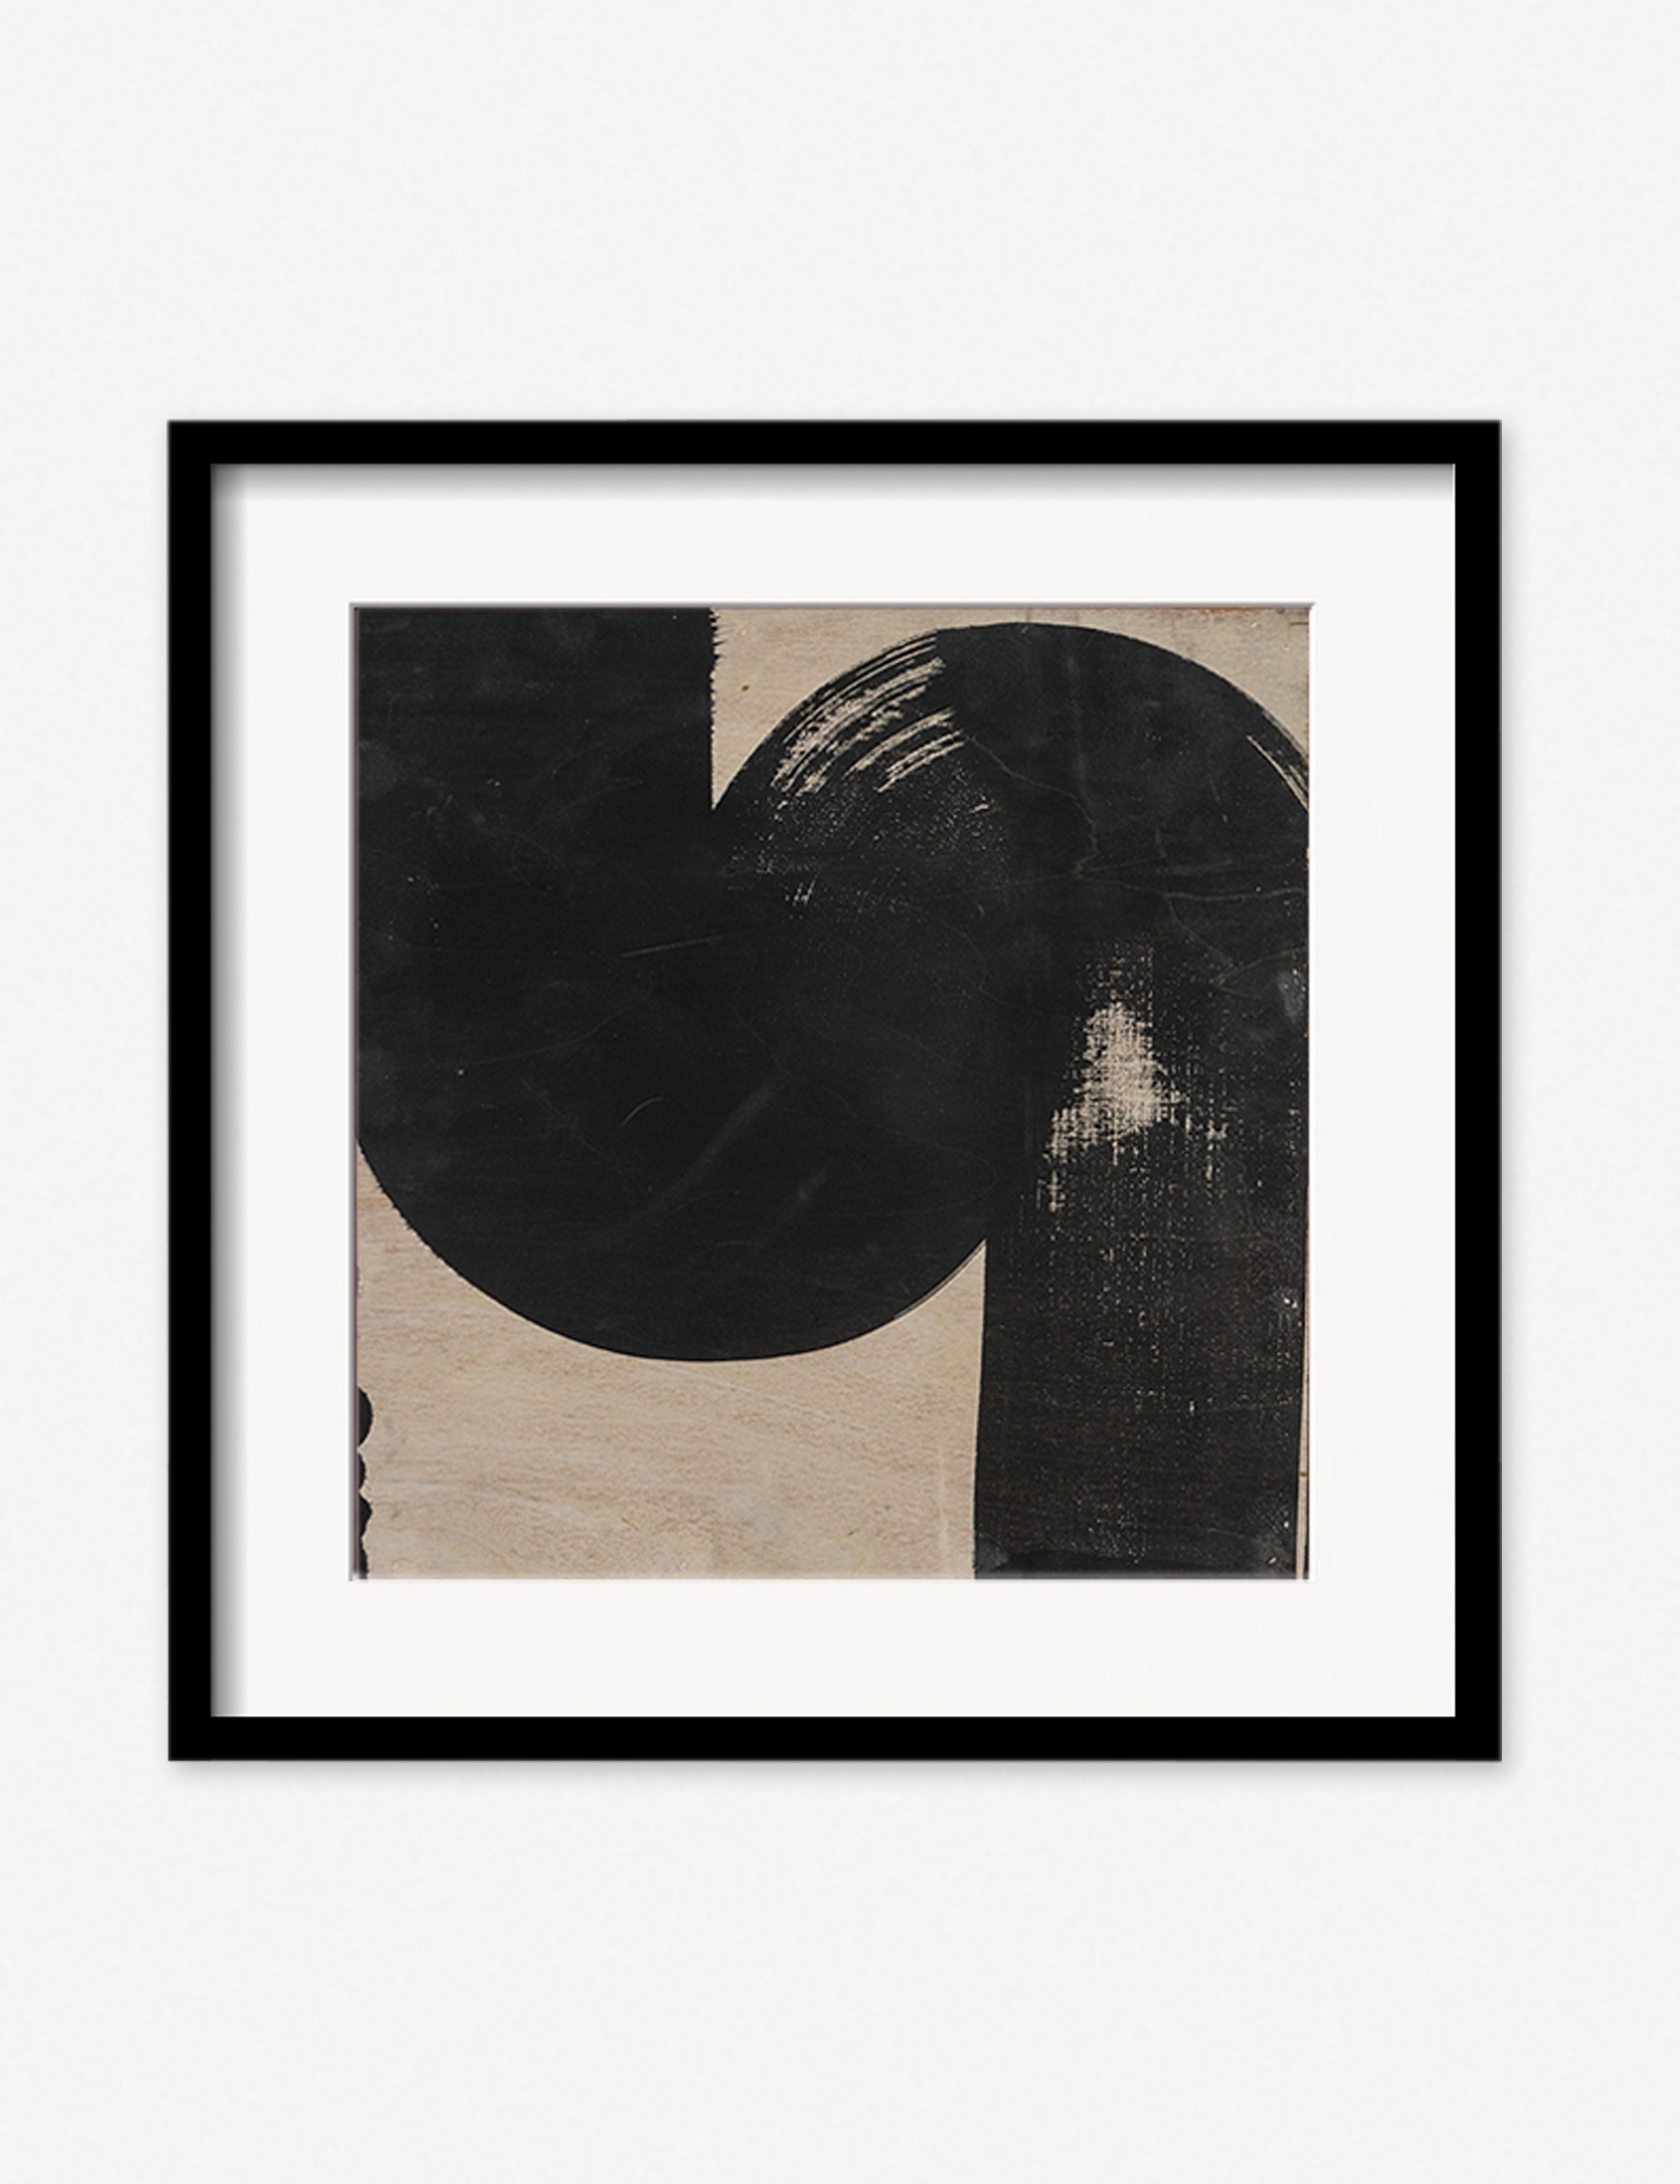 Motion Study No. 11 Print by Karlos Marquez - Image 1